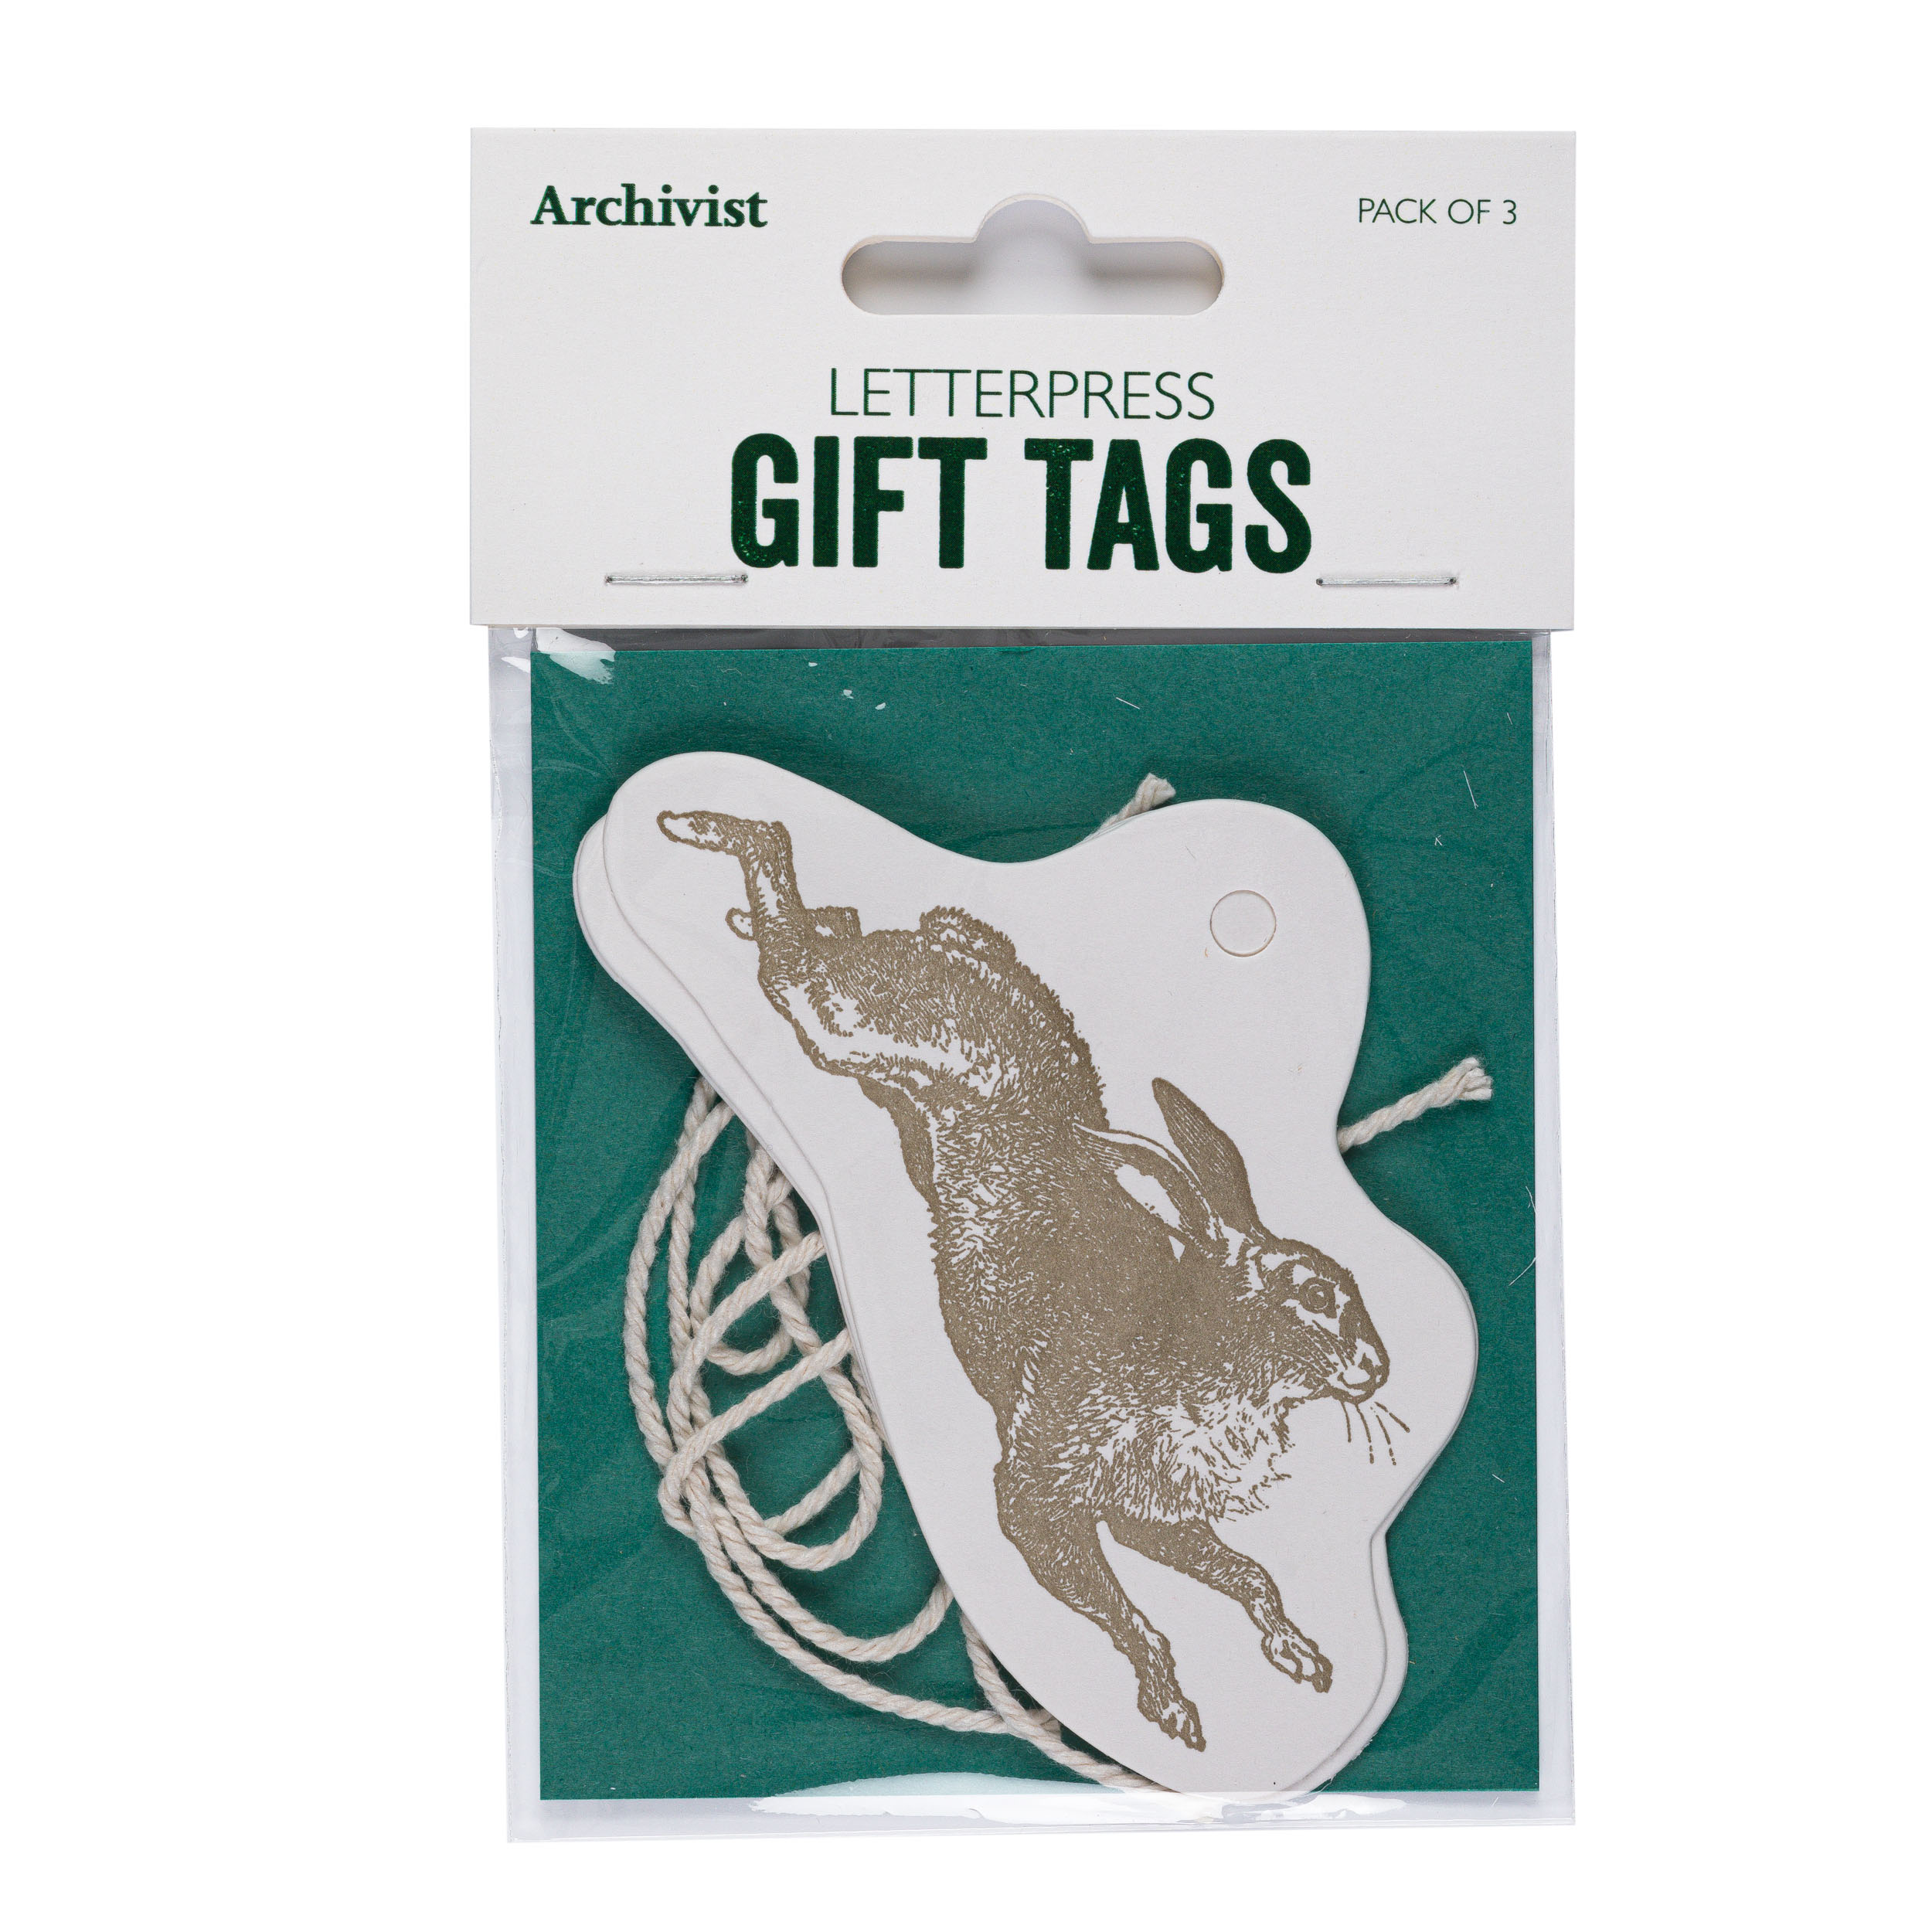 Hare Tag - Gift tags - Jason Falkner - from Archivist Gallery 